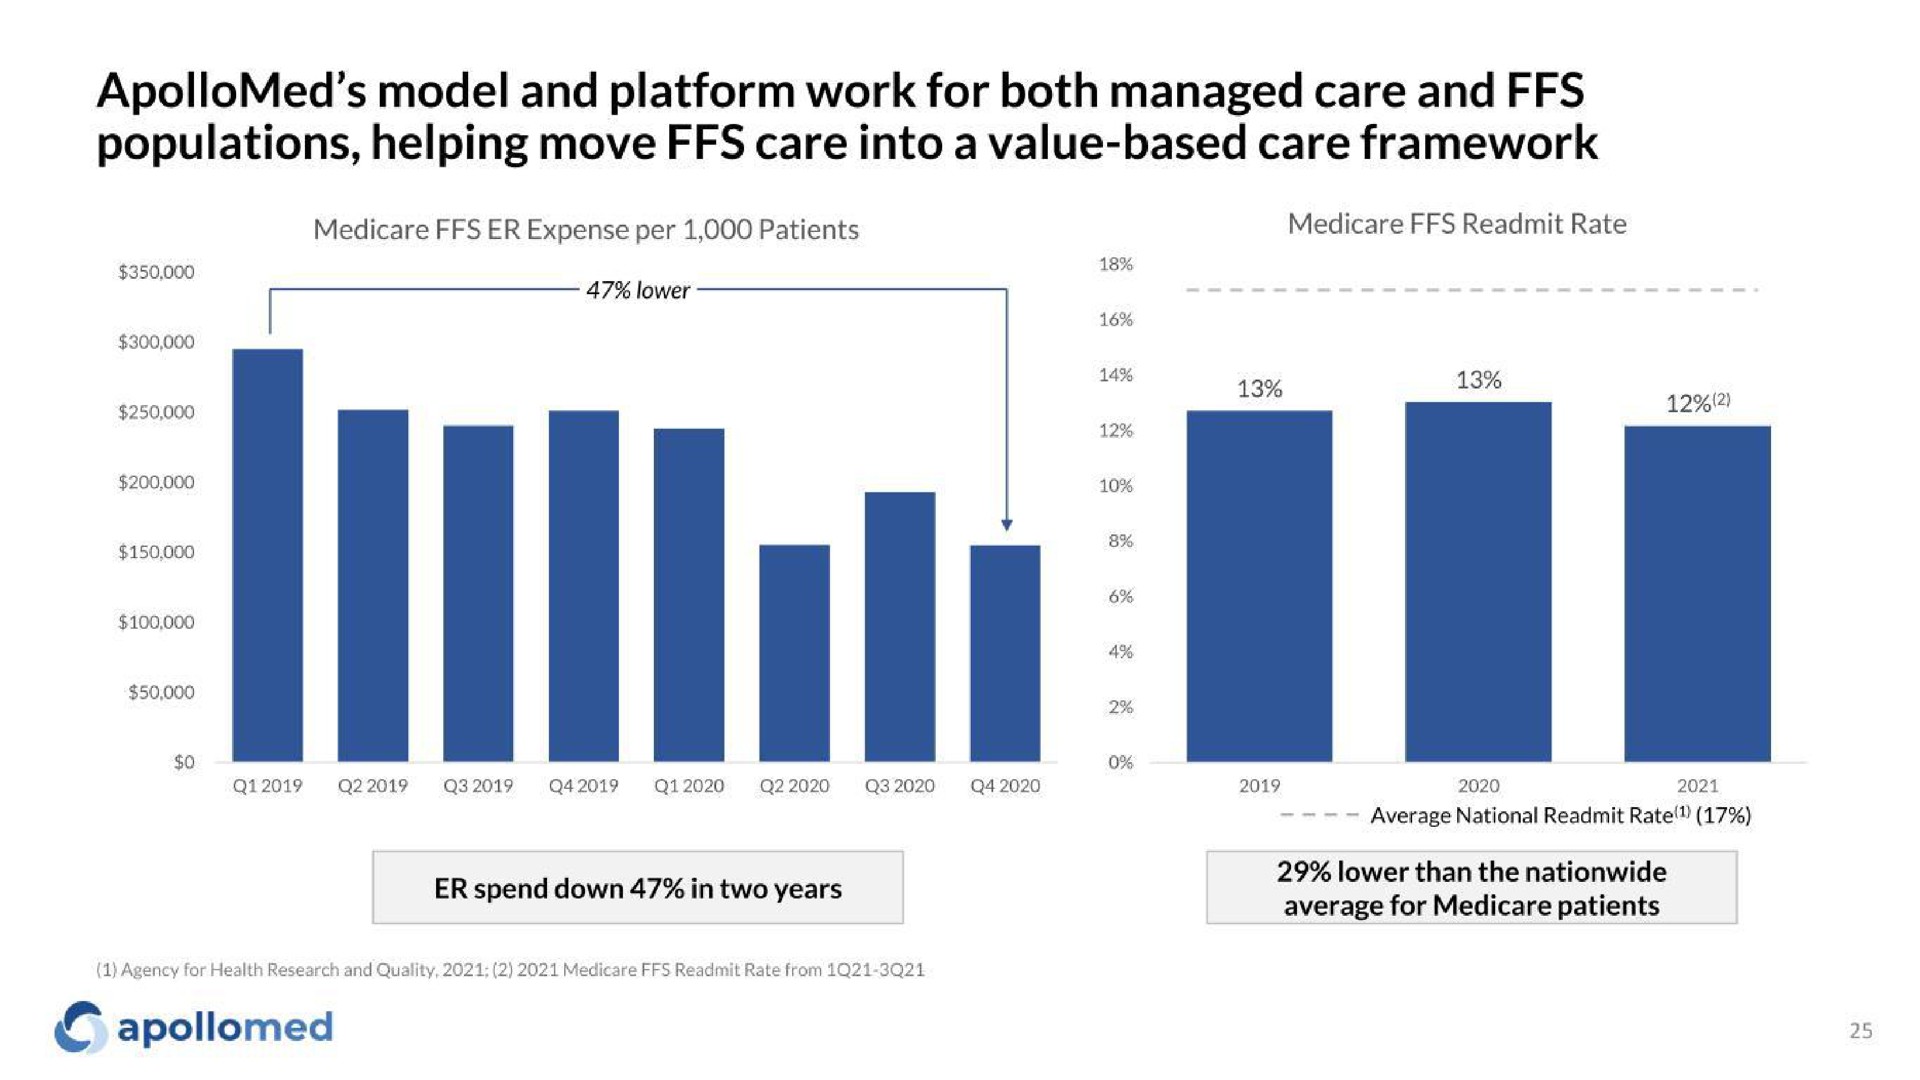 model and platform work for both managed care and populations helping move care into a value based care framework | Apollo Medical Holdings